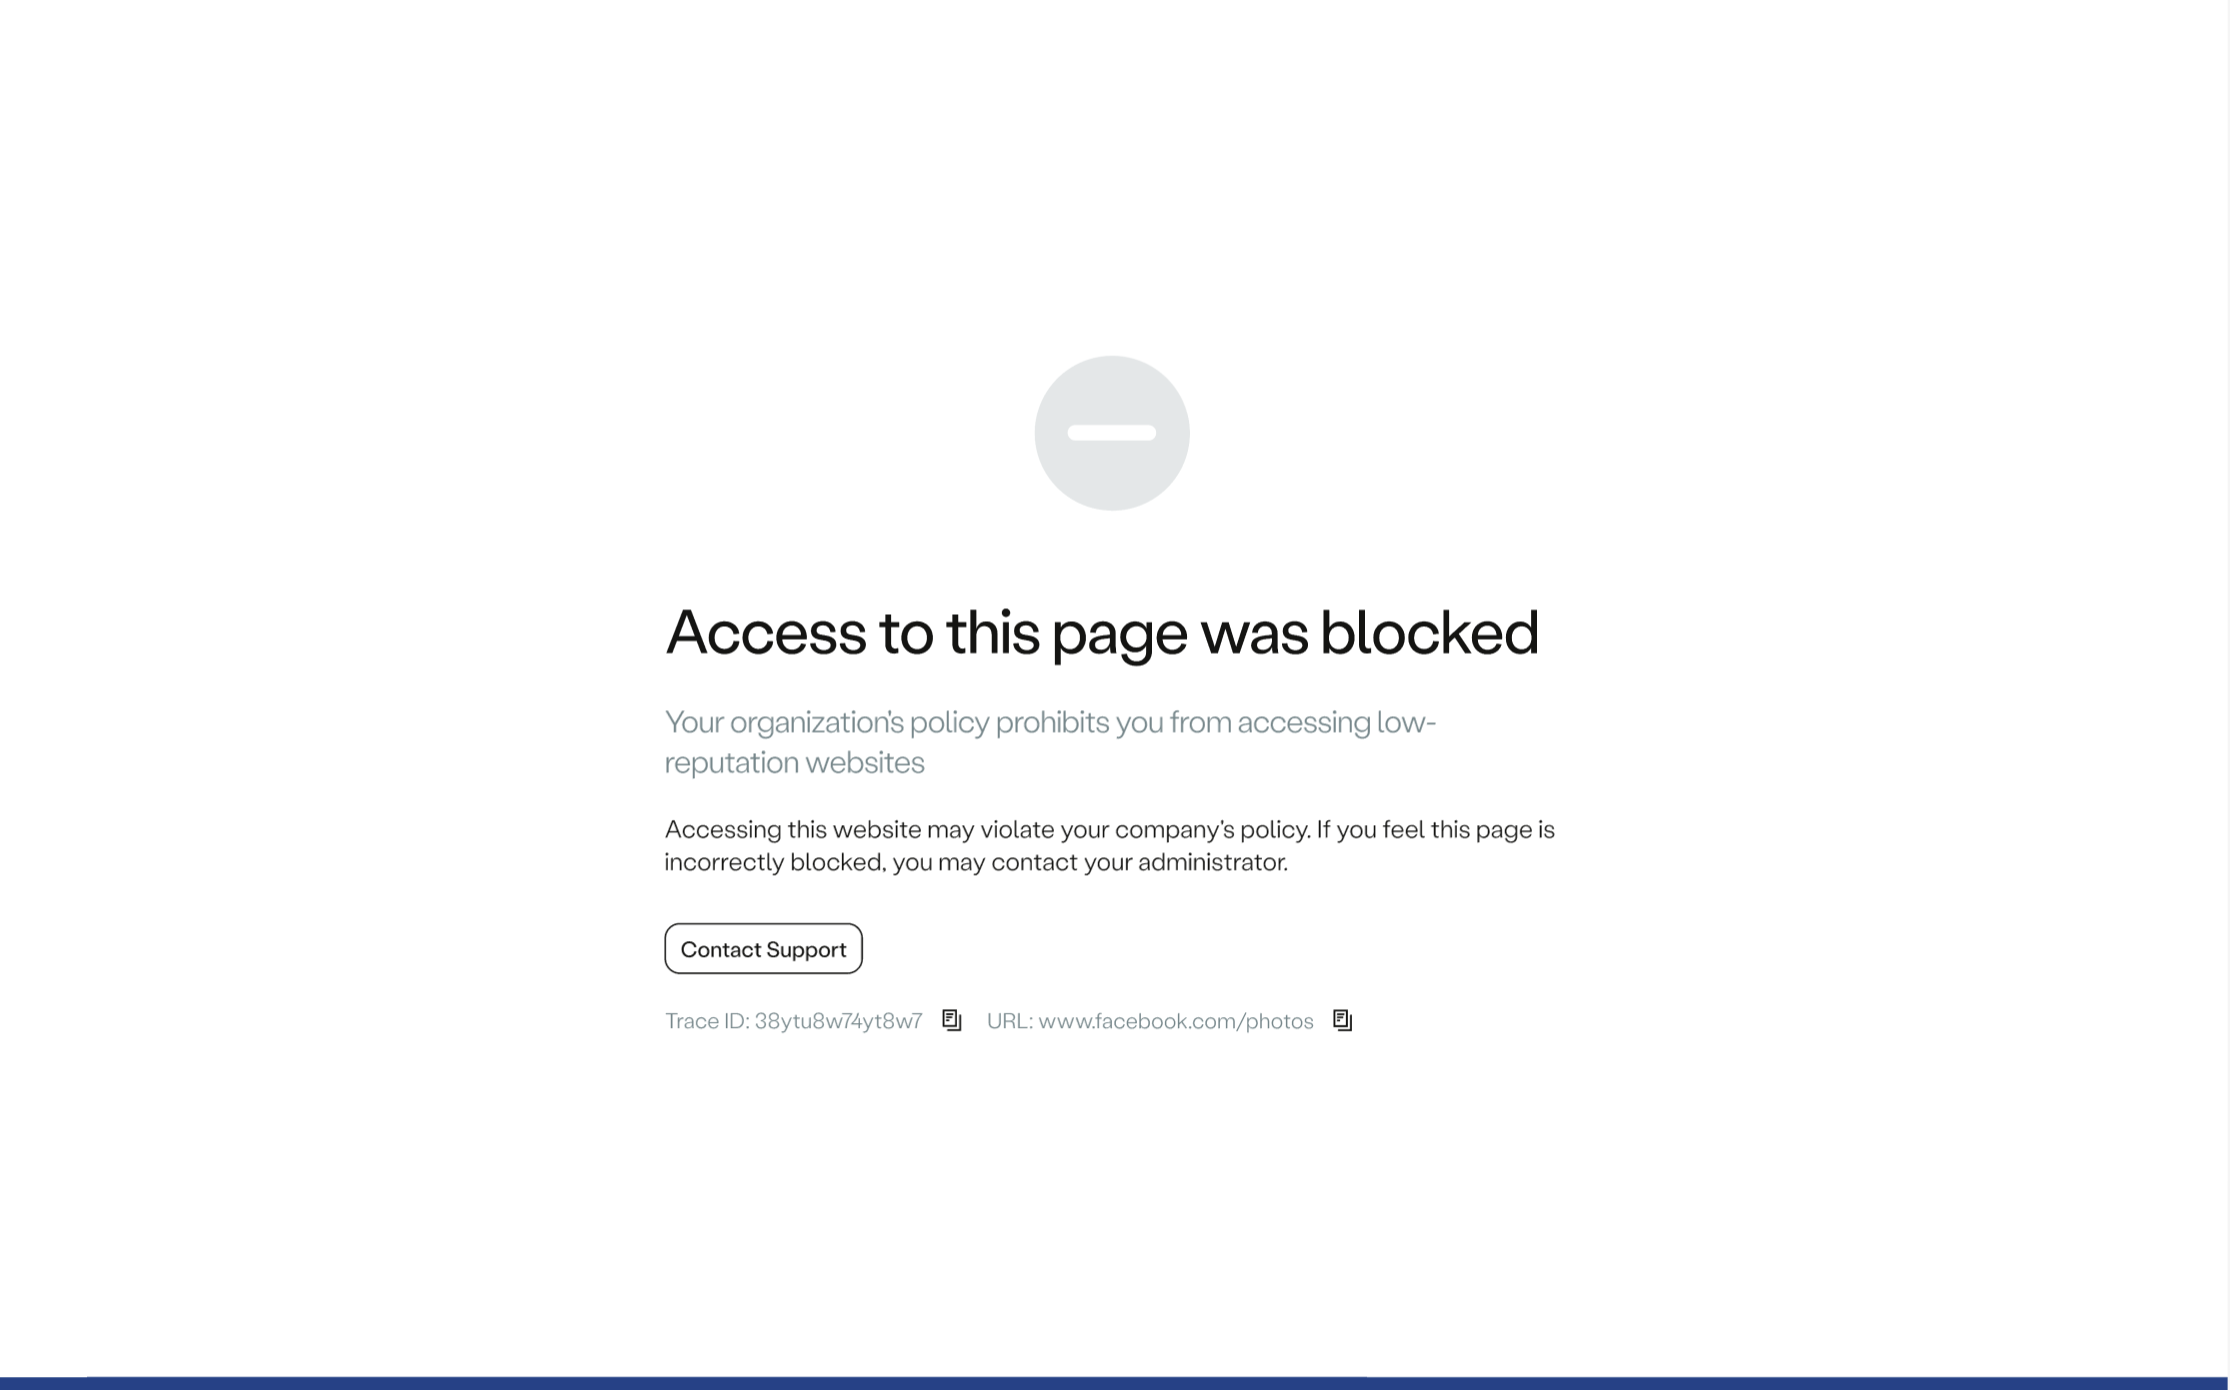 Access was blocked due to low reputation